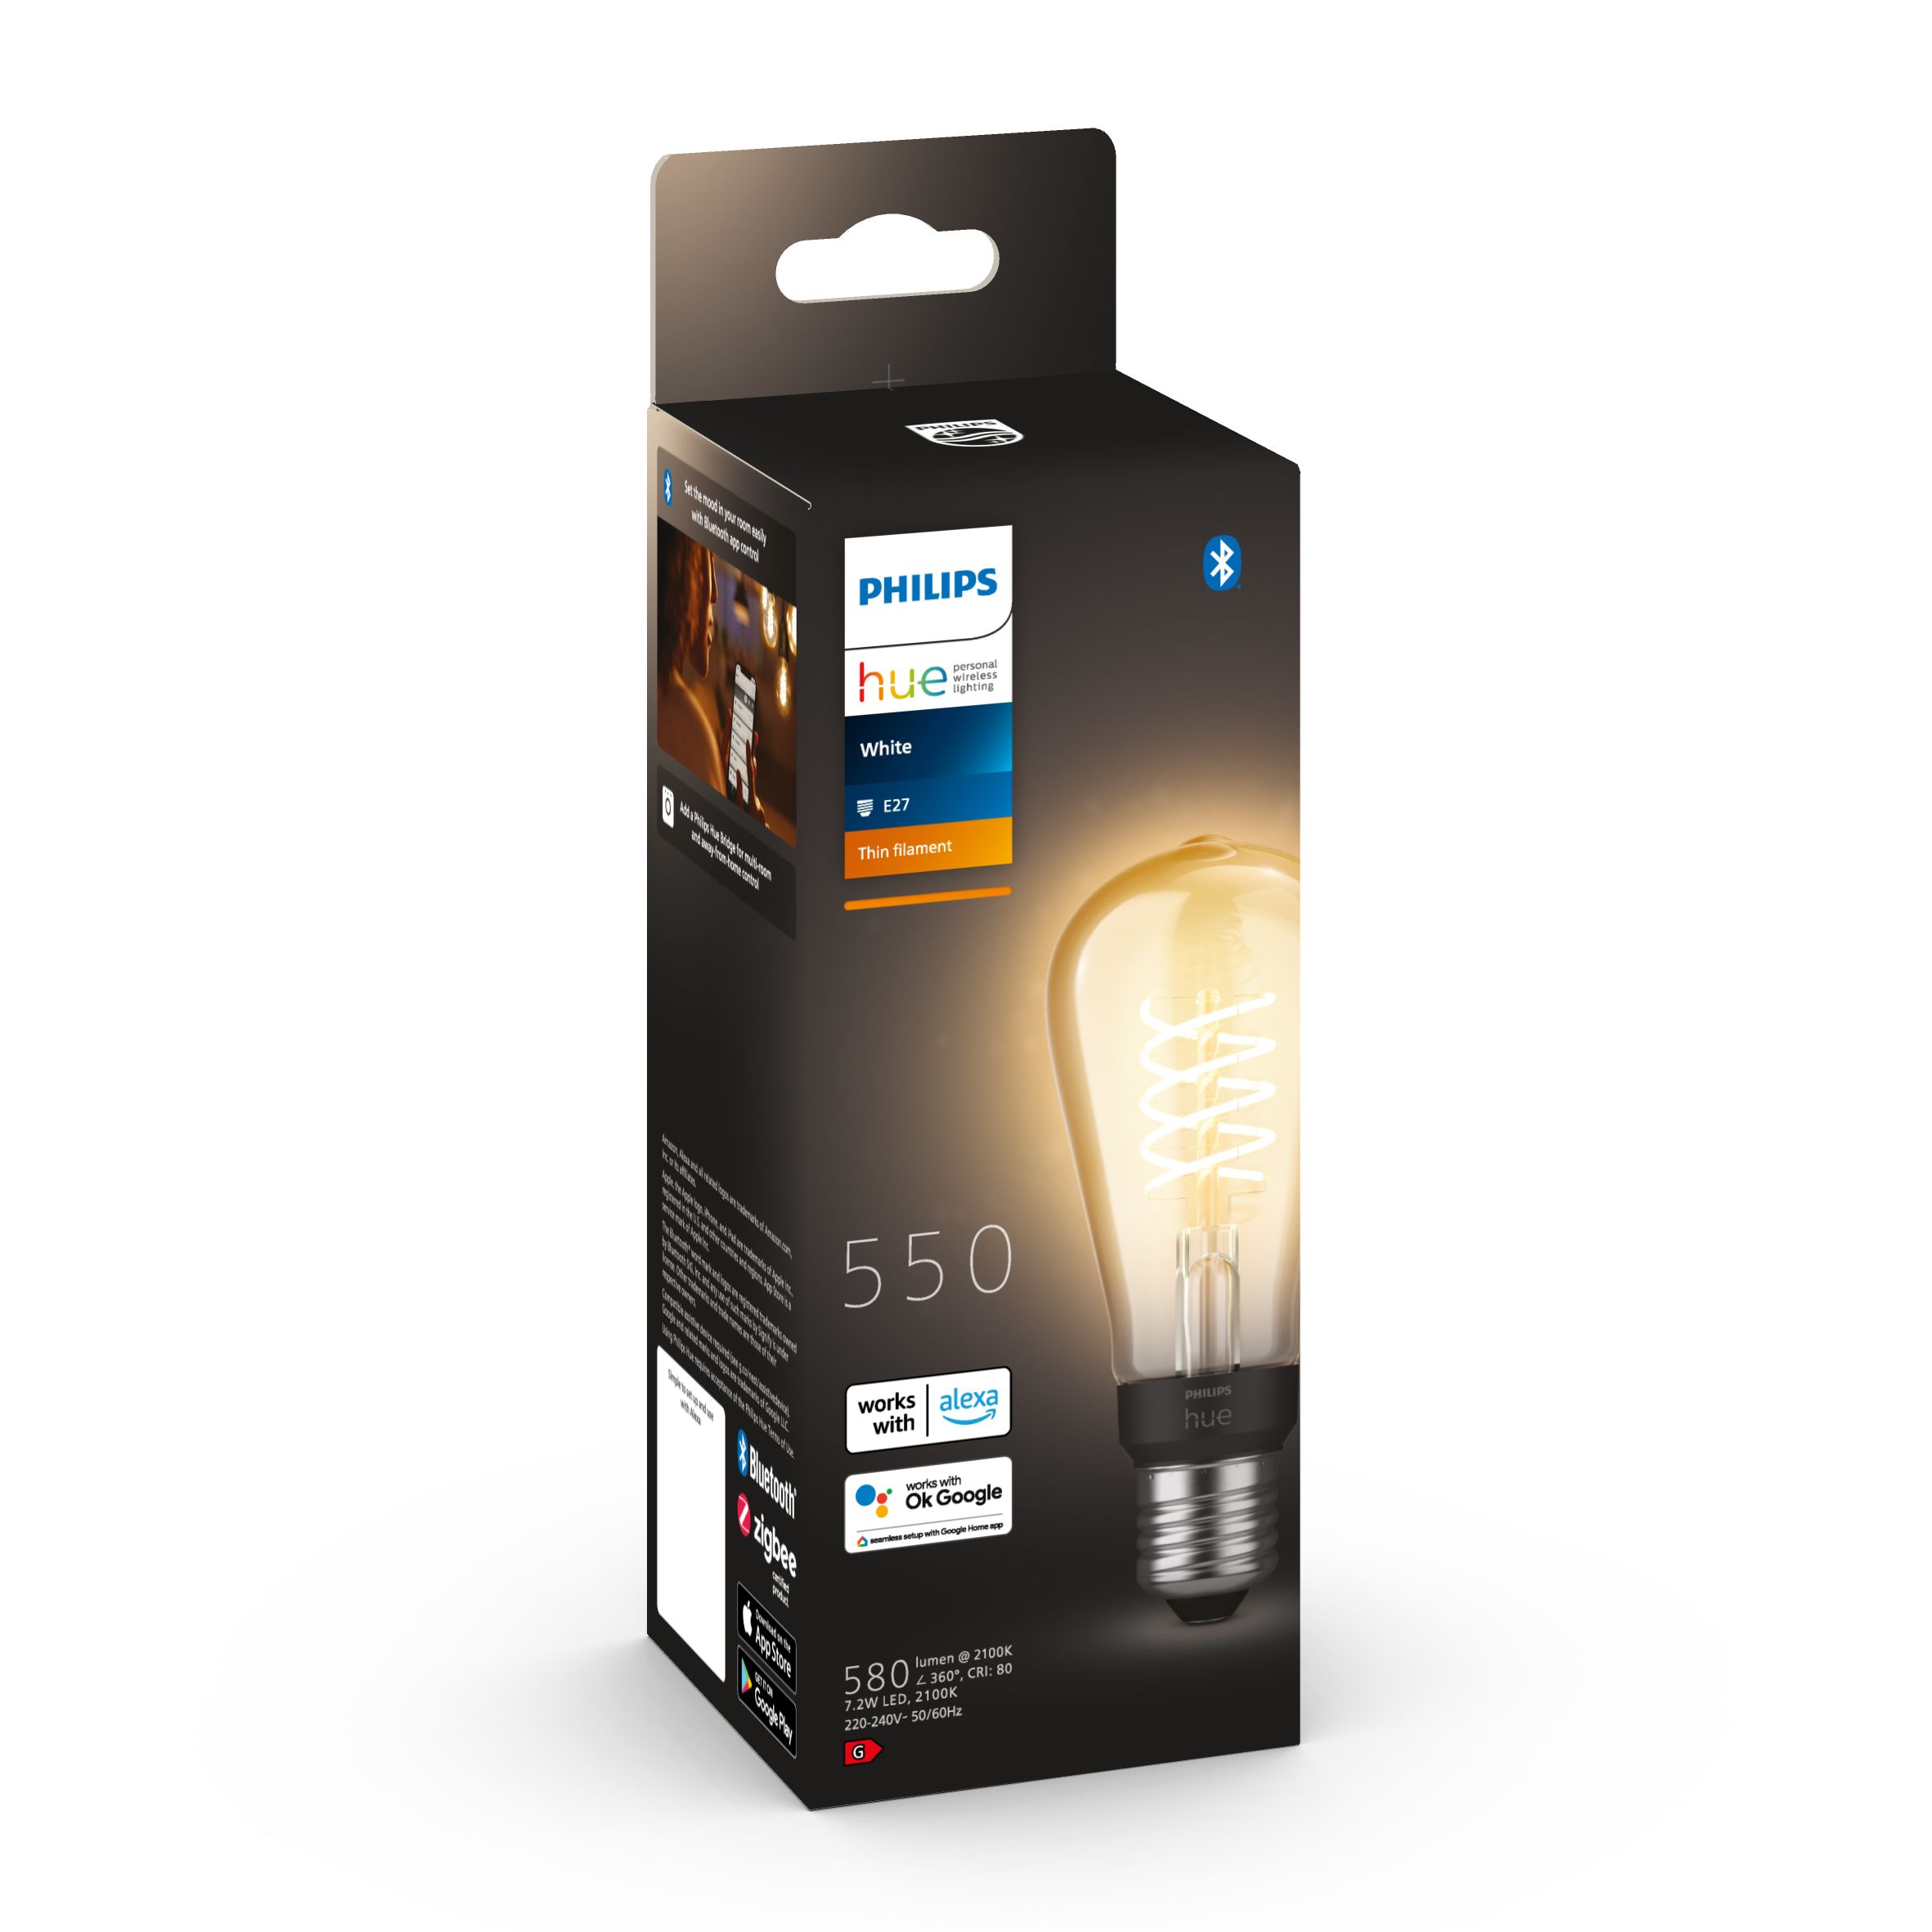 Philips Hue LED Cool white & warm white ST64 Non-dimmable Light bulb